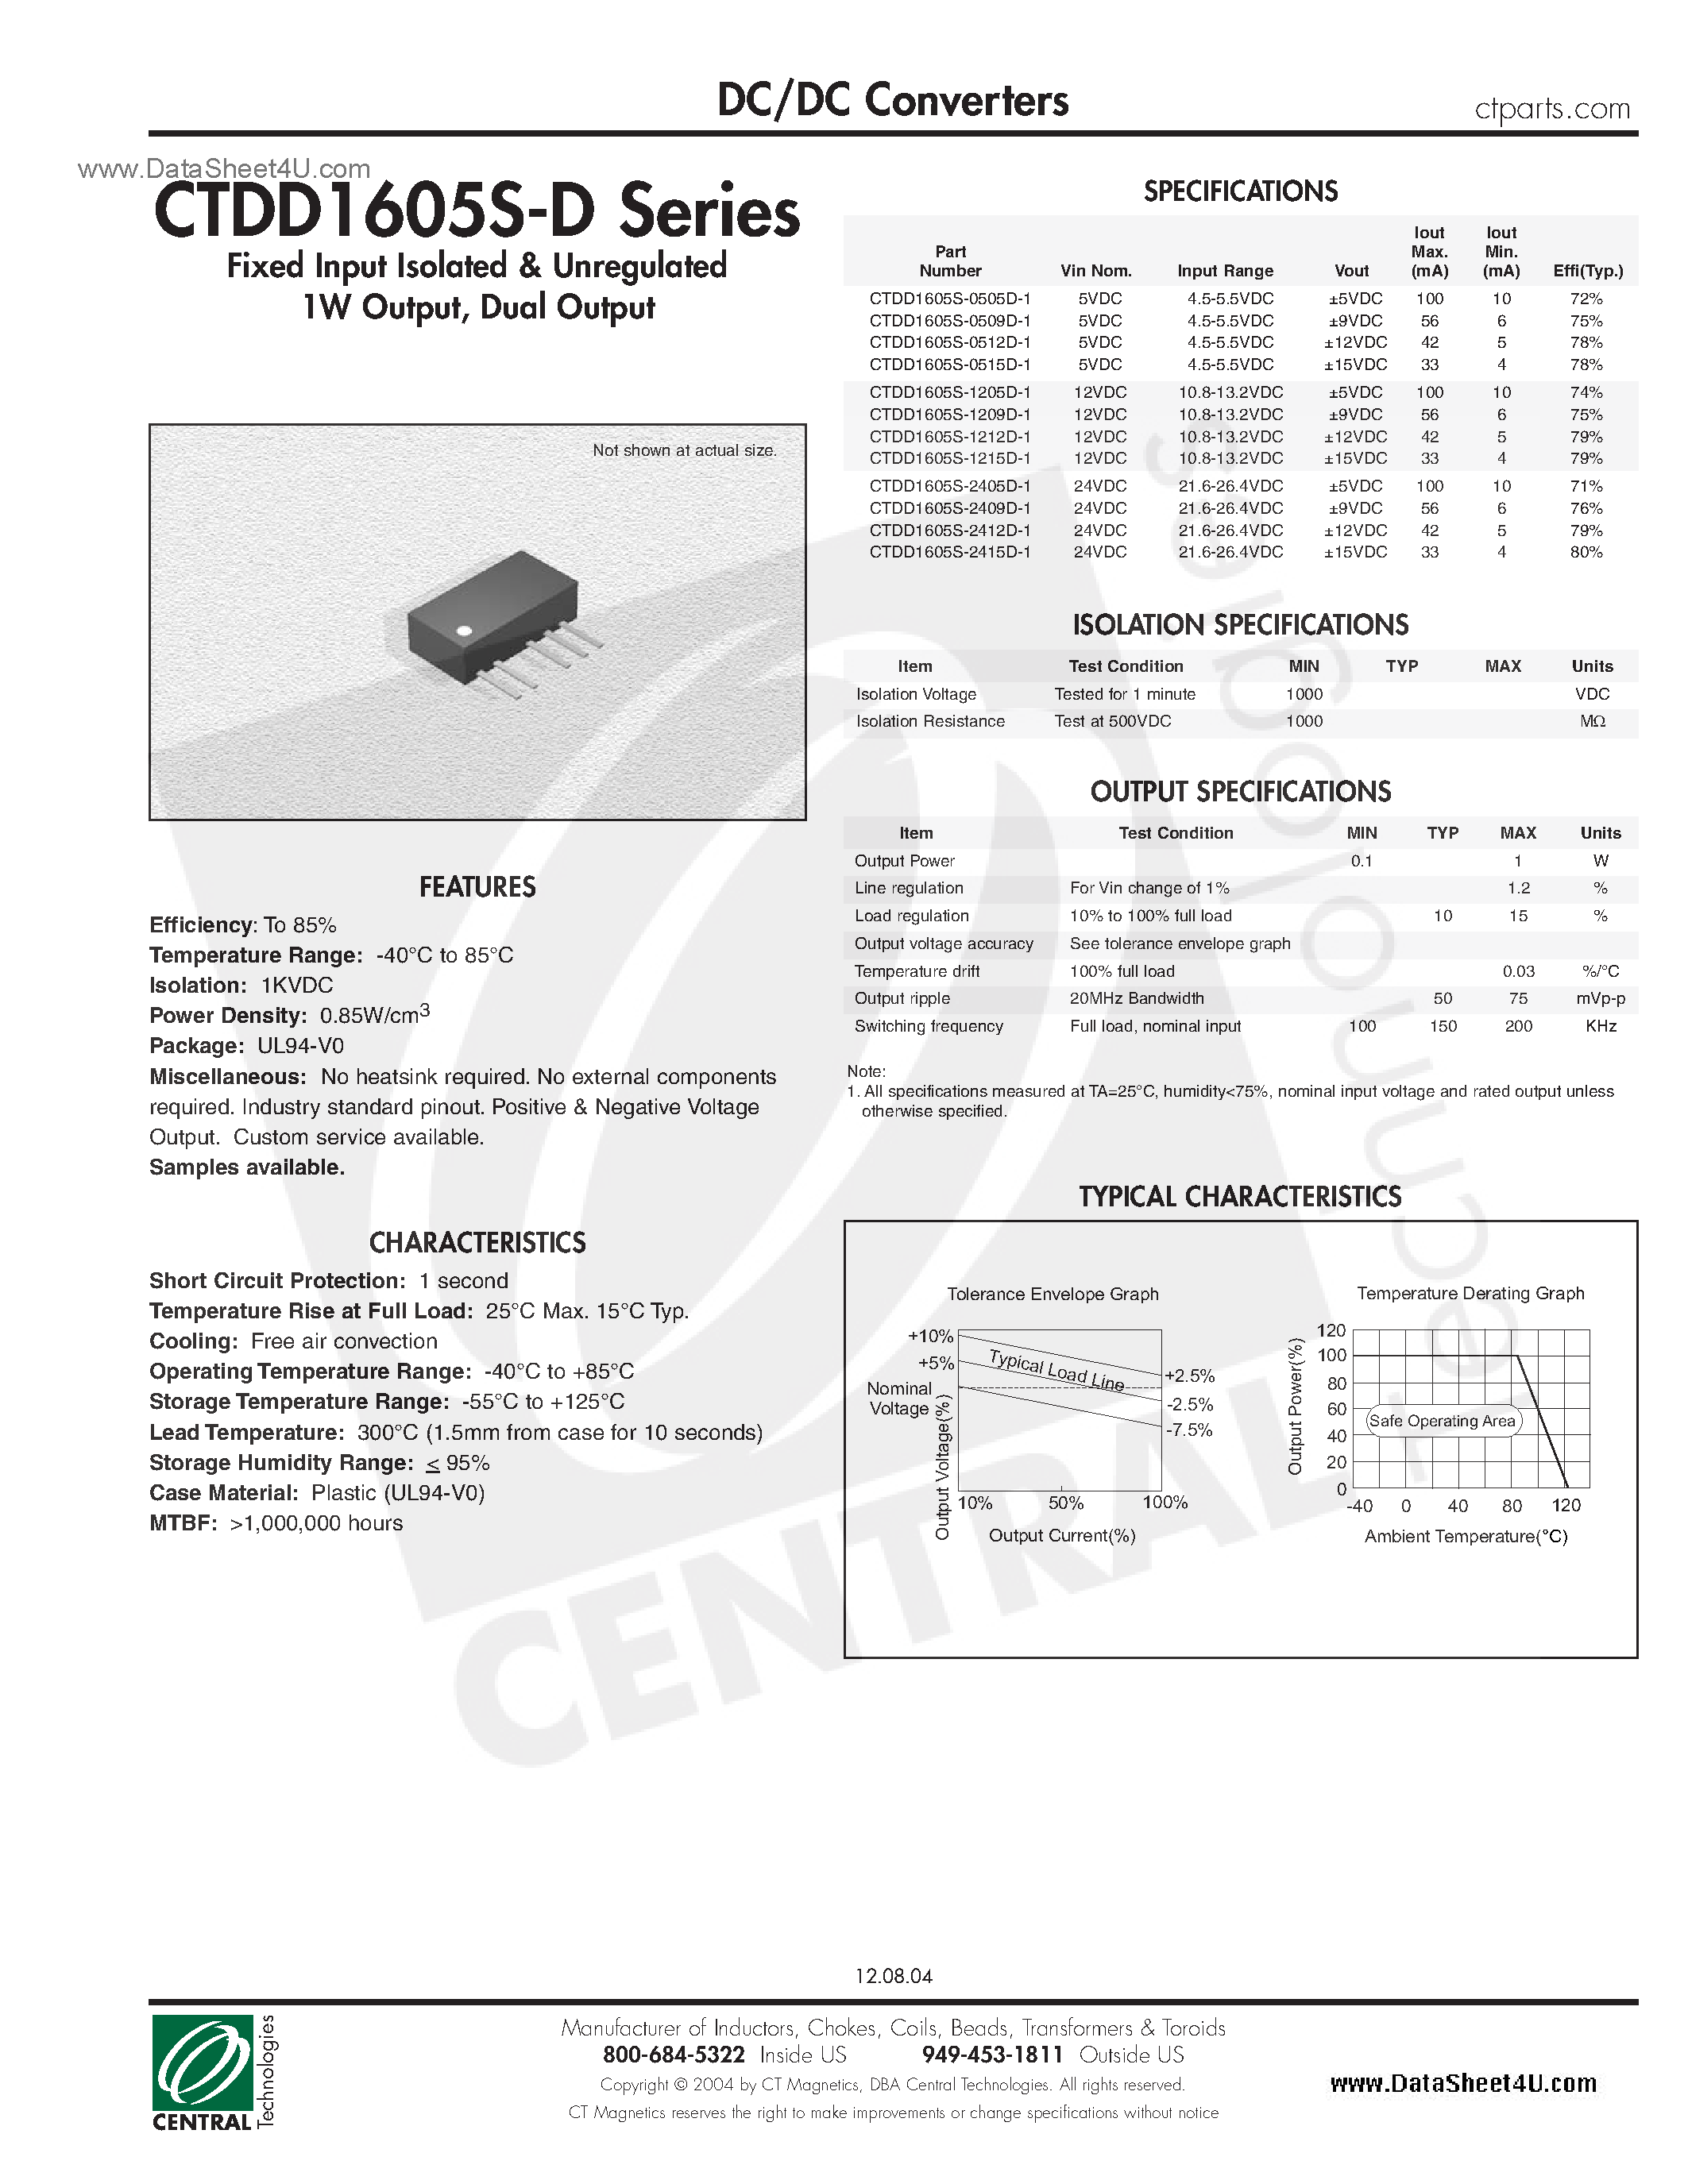 Datasheet CTDD1605S-D - DC/DC Converters page 1